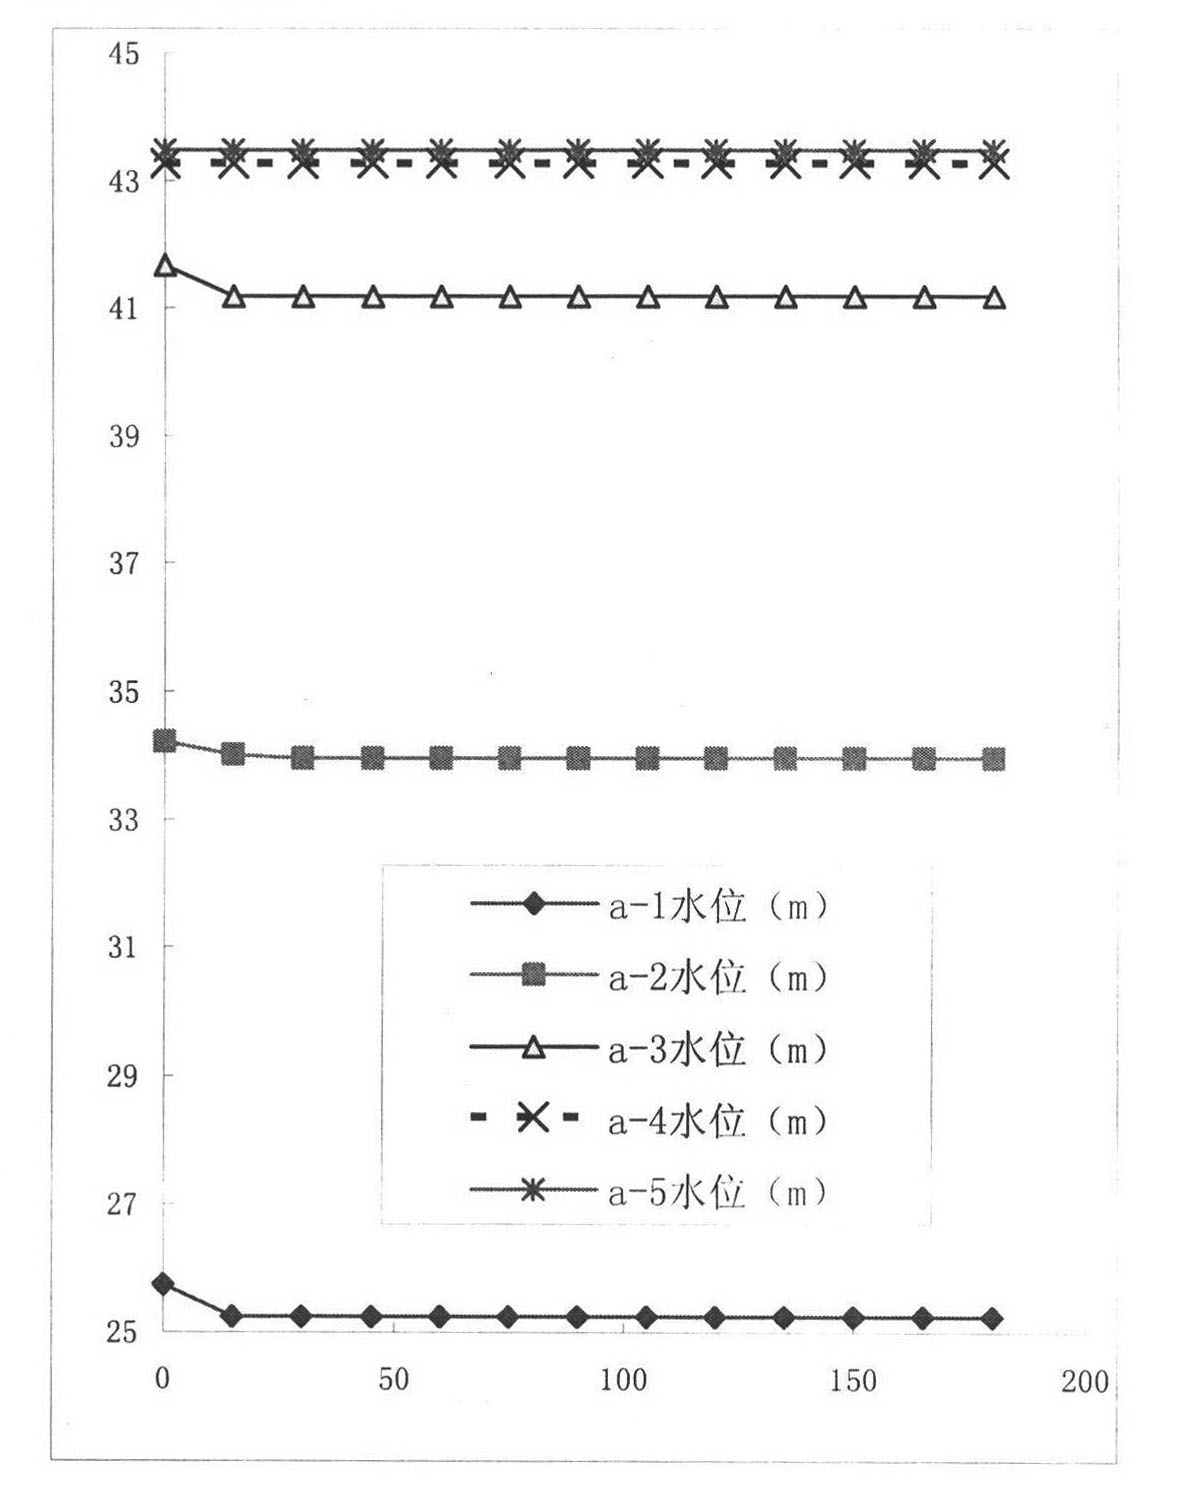 Underground water connectivity detection method for obtaining underlying surface conditions of distributed hydrological model